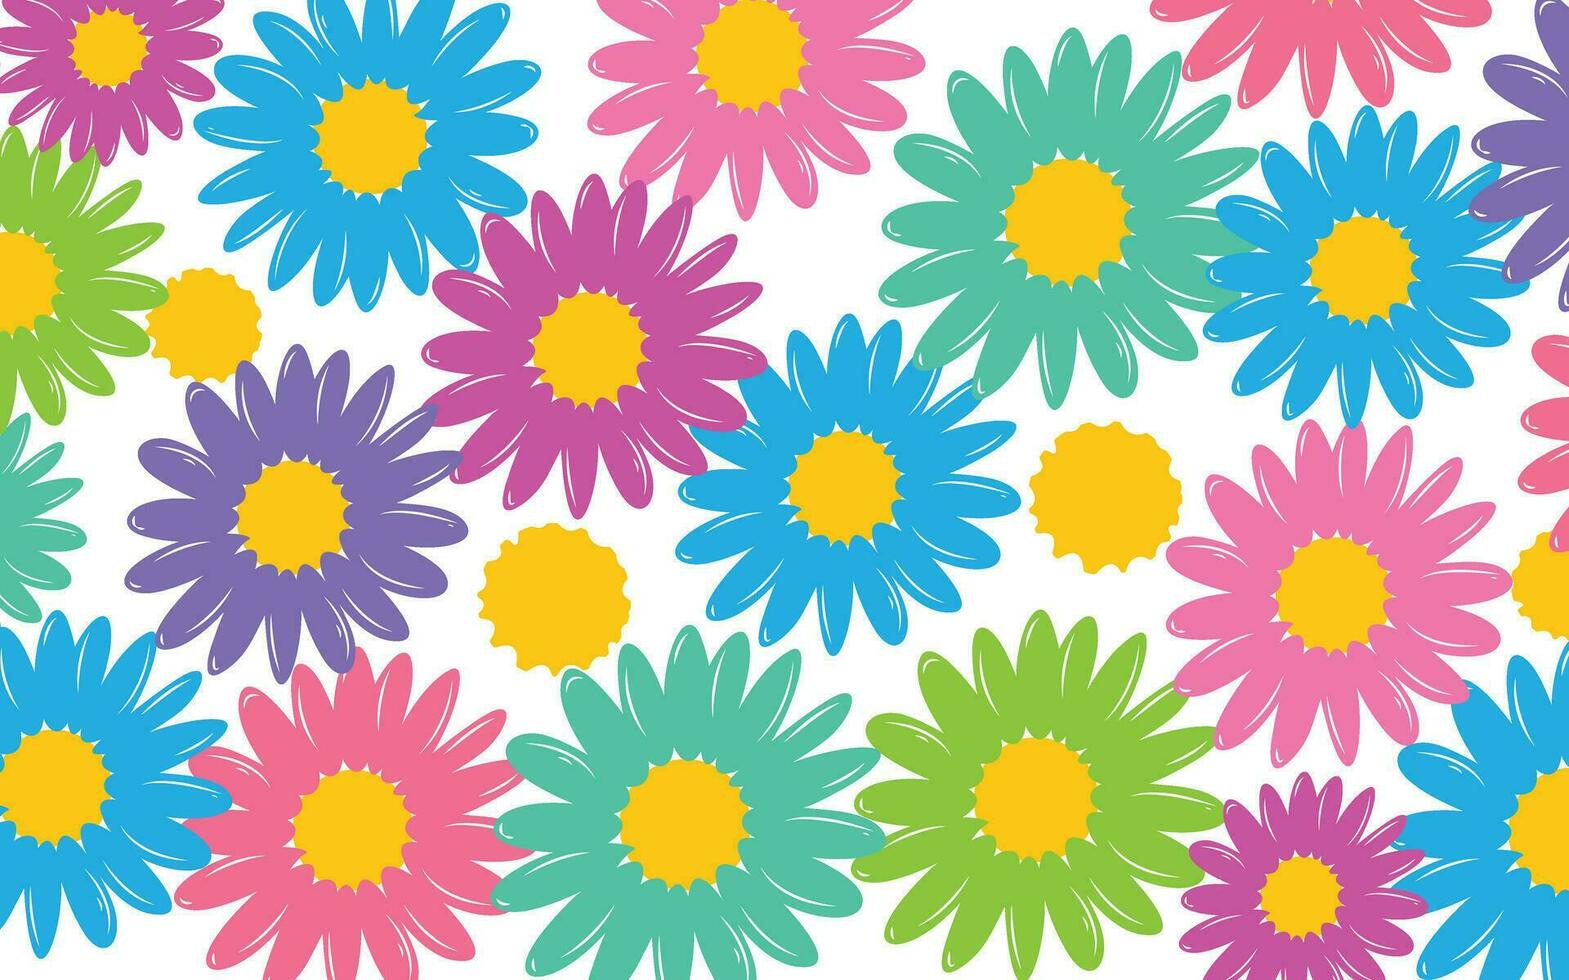 Flower seamless pattern, endless hand drawing floral textile pattern texture design vector